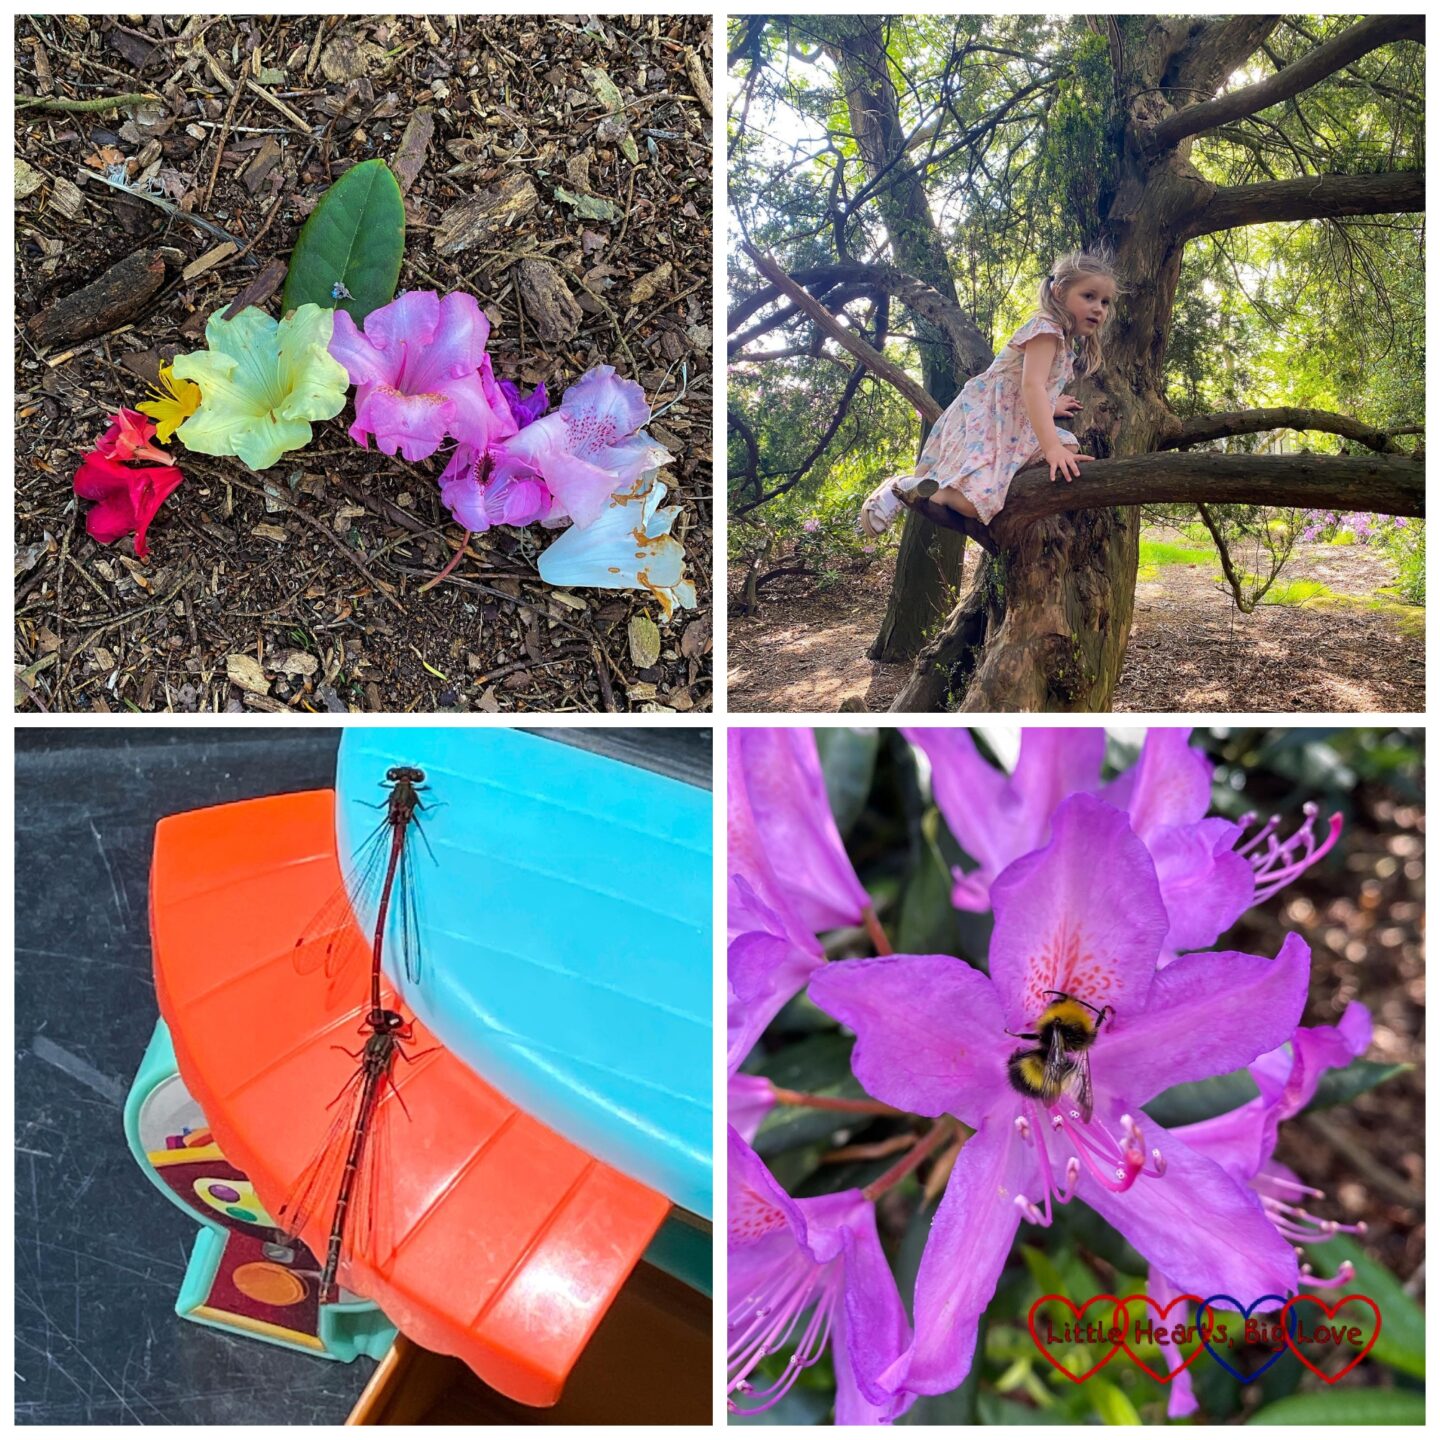 A rainbow of rhododendron flowers; Sophie climbing a tree; two damselflies on top of a plastic toy; a bee in a purple rhododendron flower